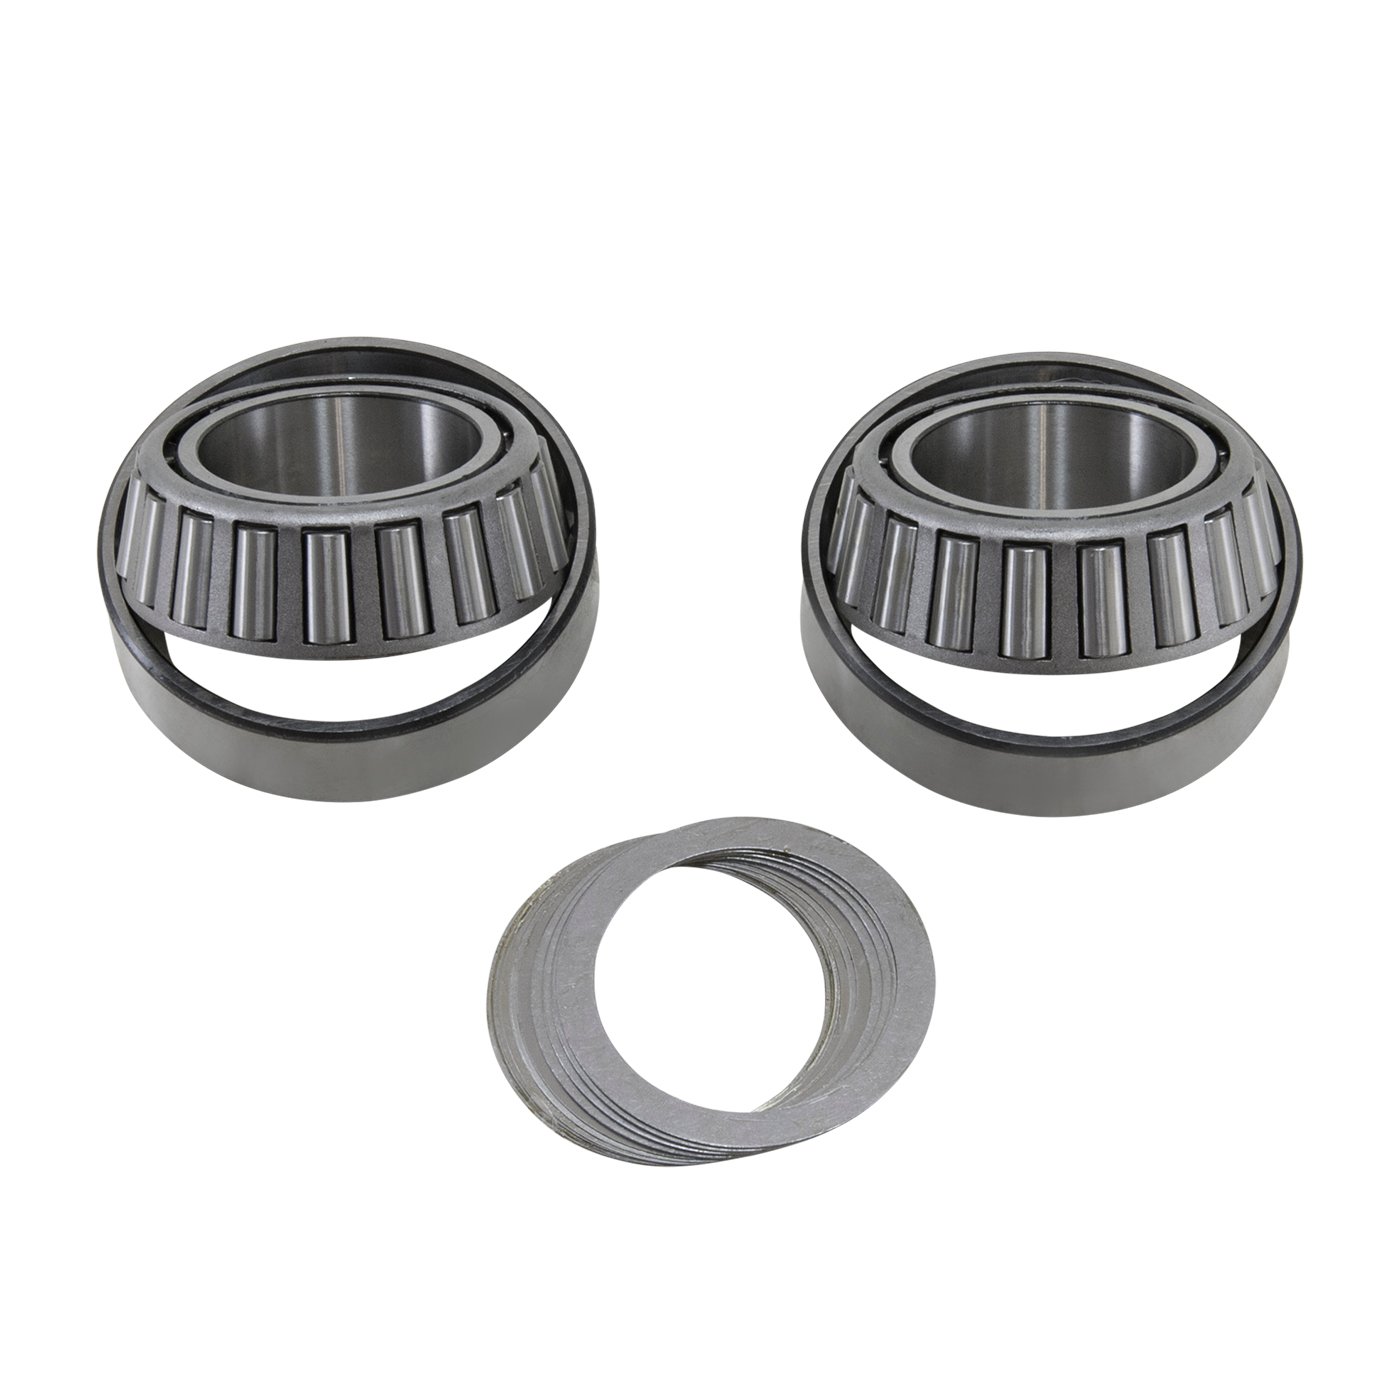 Carrier Installation Kit For Dana 60 Differential.